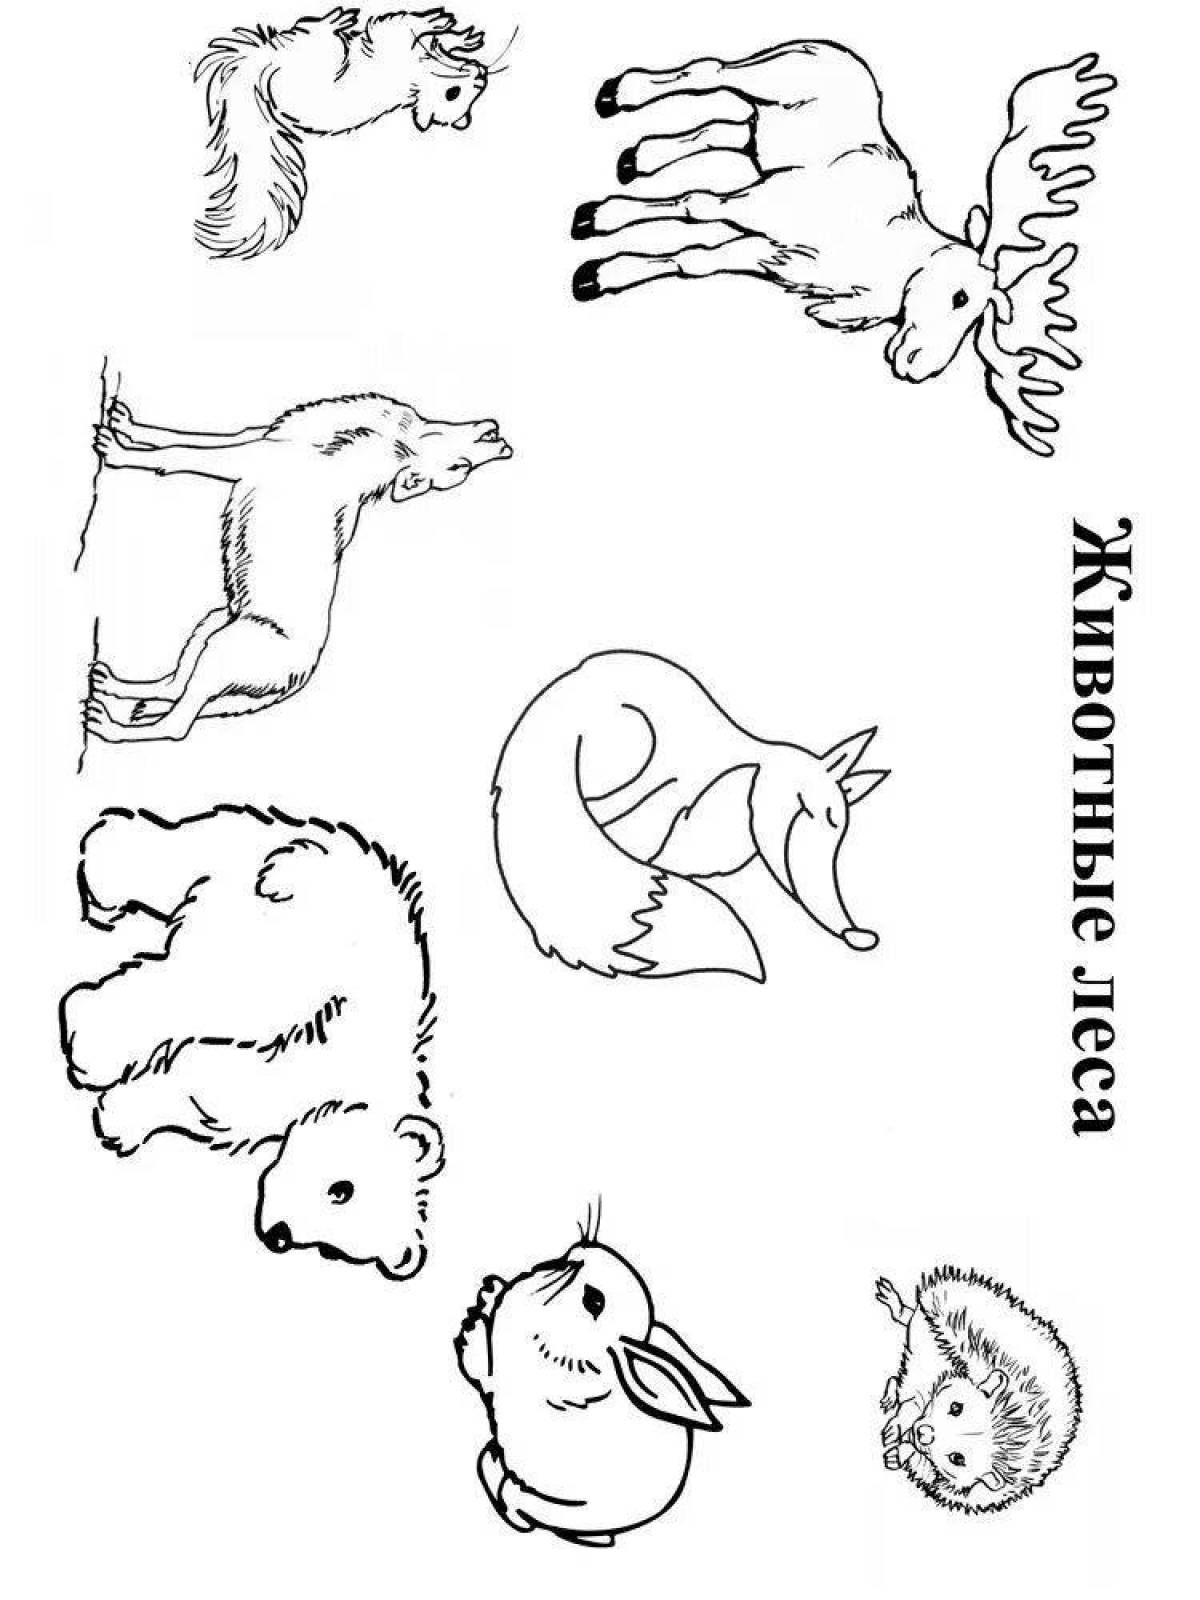 Nimble ostrich coloring page